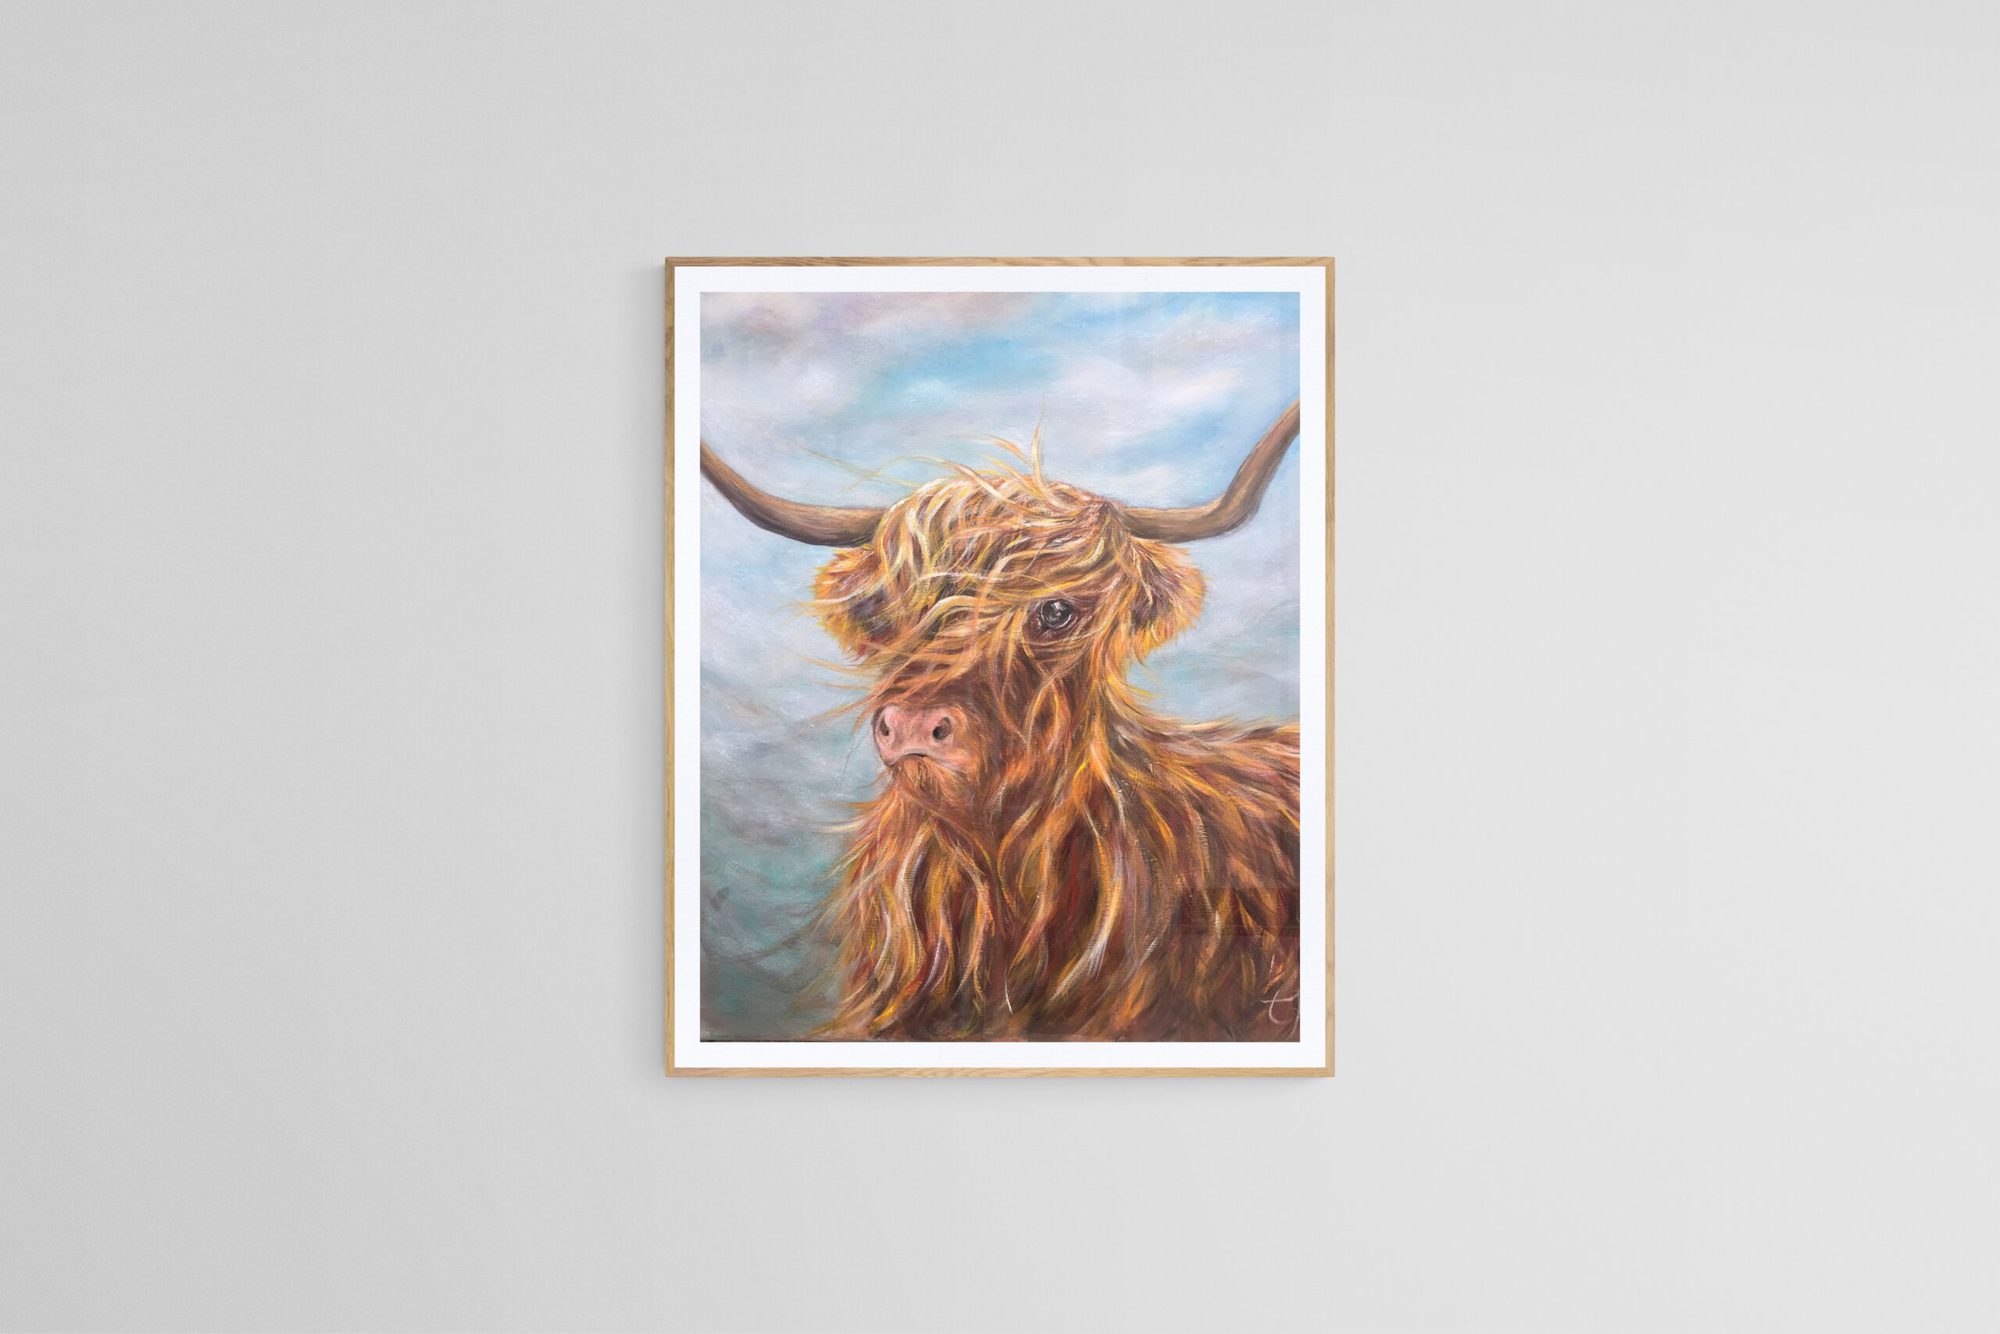 Highland cow 2 by Tandy Pengelly